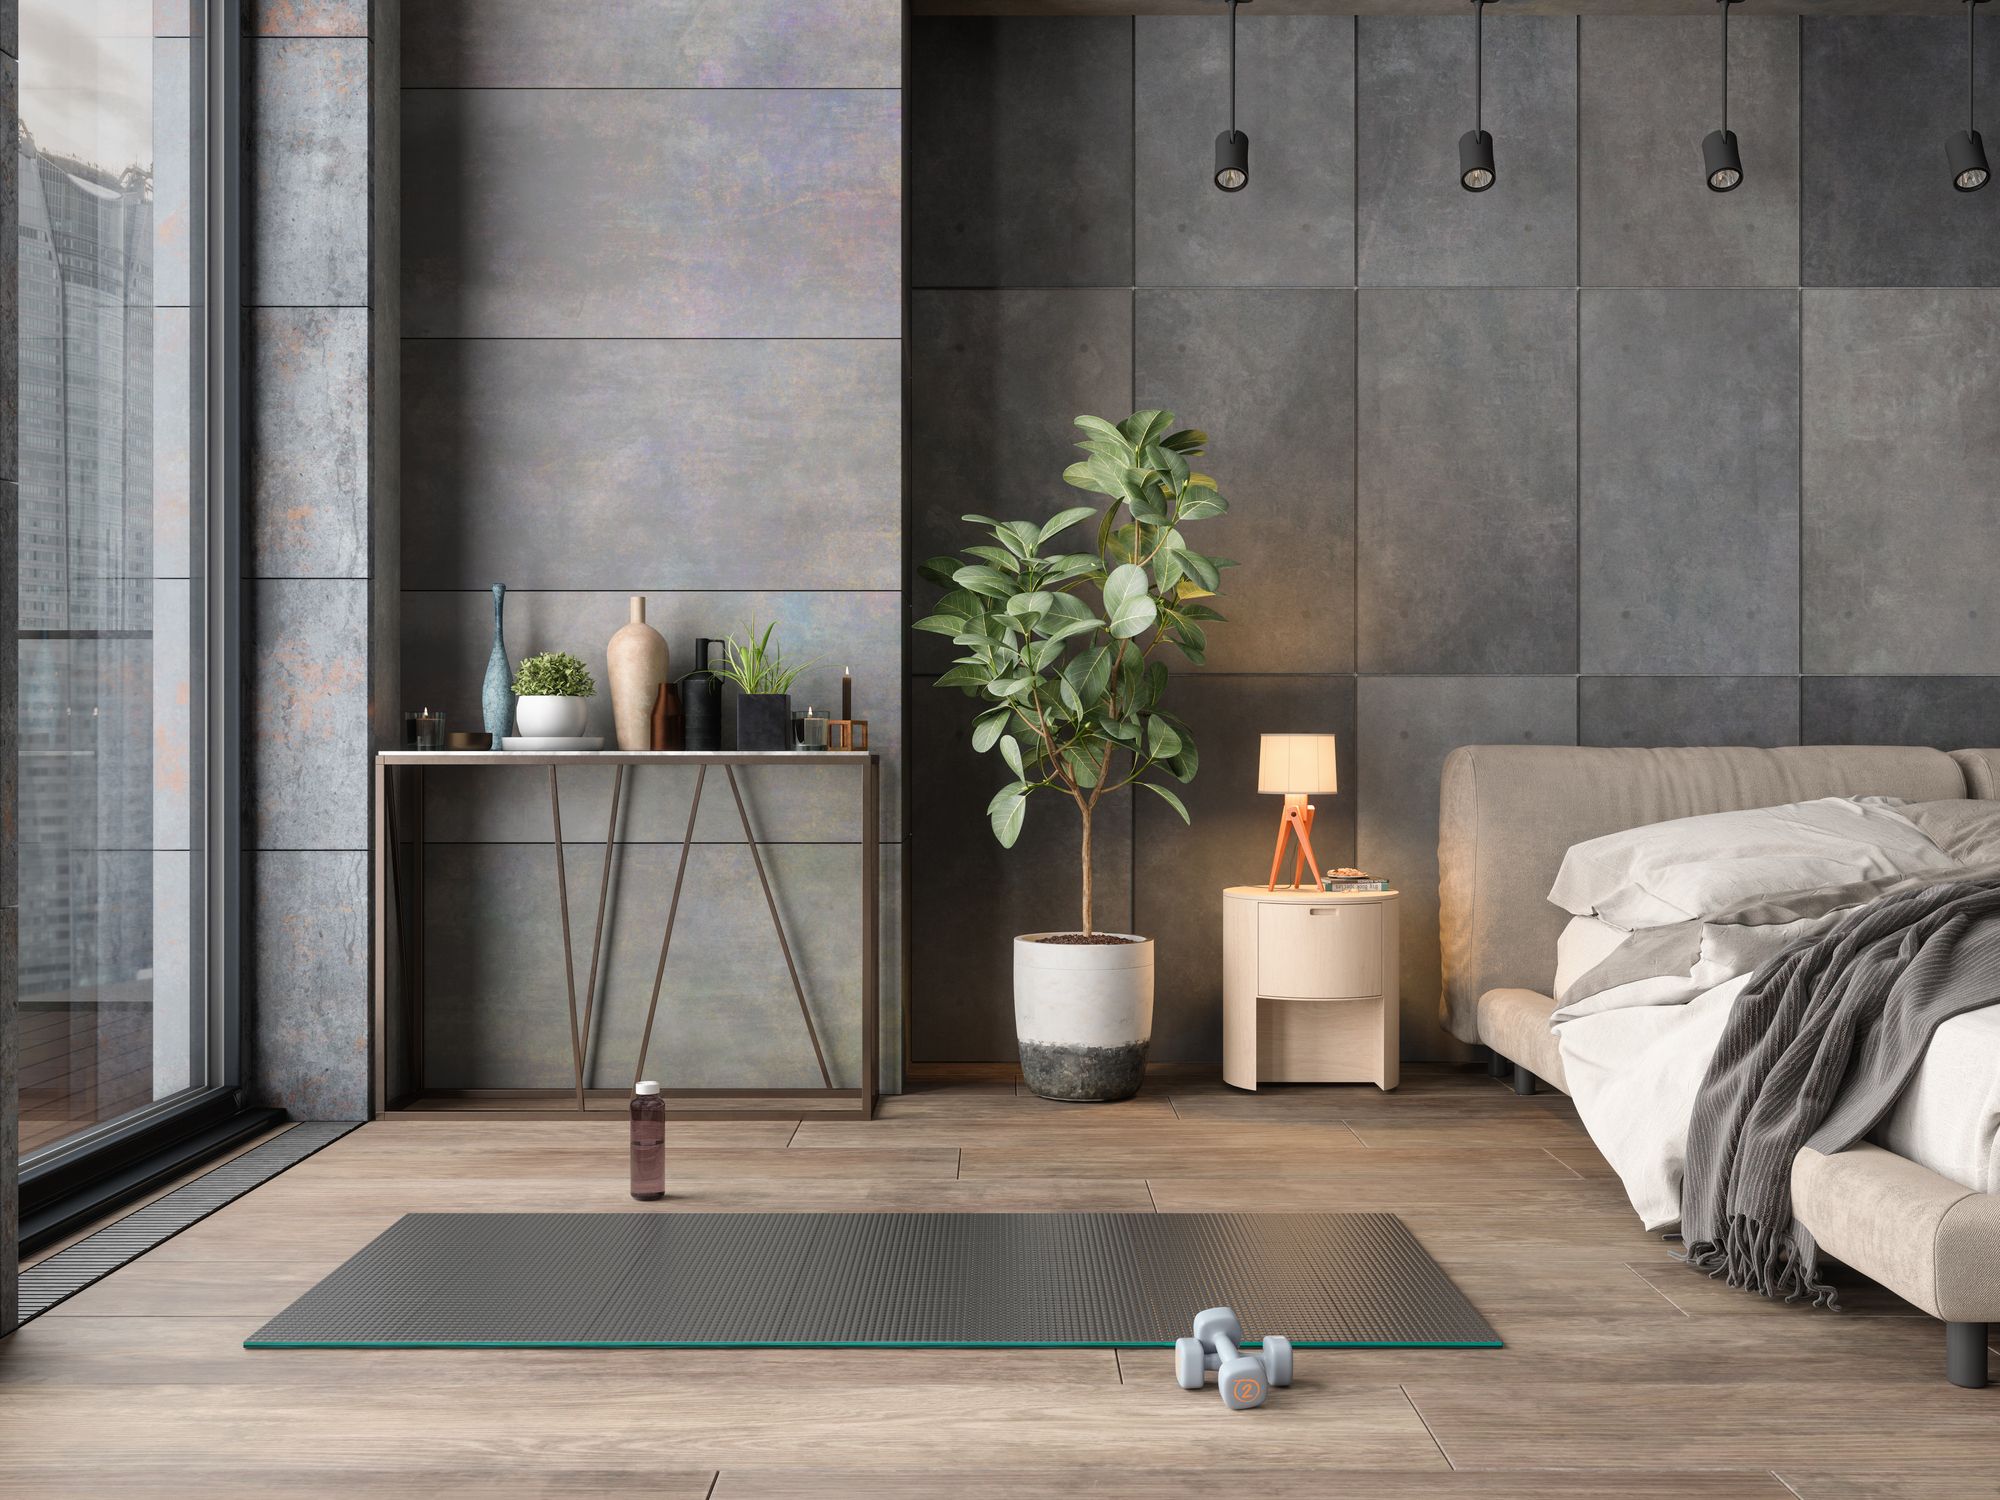 11 Wellness Room Designs for Every Space and Budget